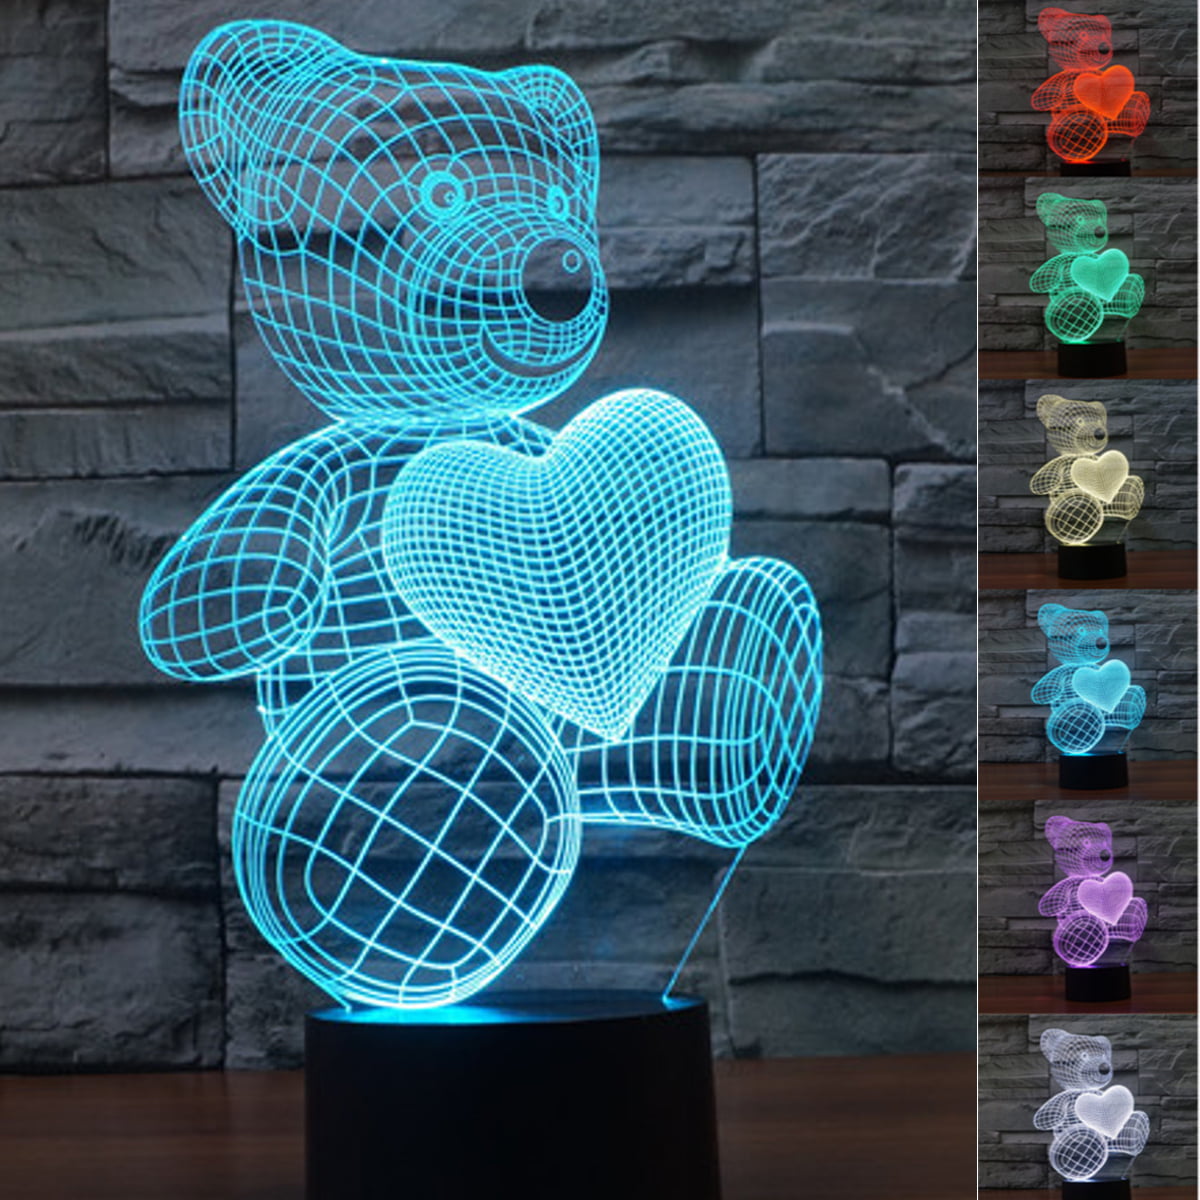 7 Colors Change Decor Lamp Touch Control USB Charge Table Beside Lamp Gift Toys for Children Kids 3D Night Light 3D Led Illusion Lamp Polar Bear Boys, Girls 